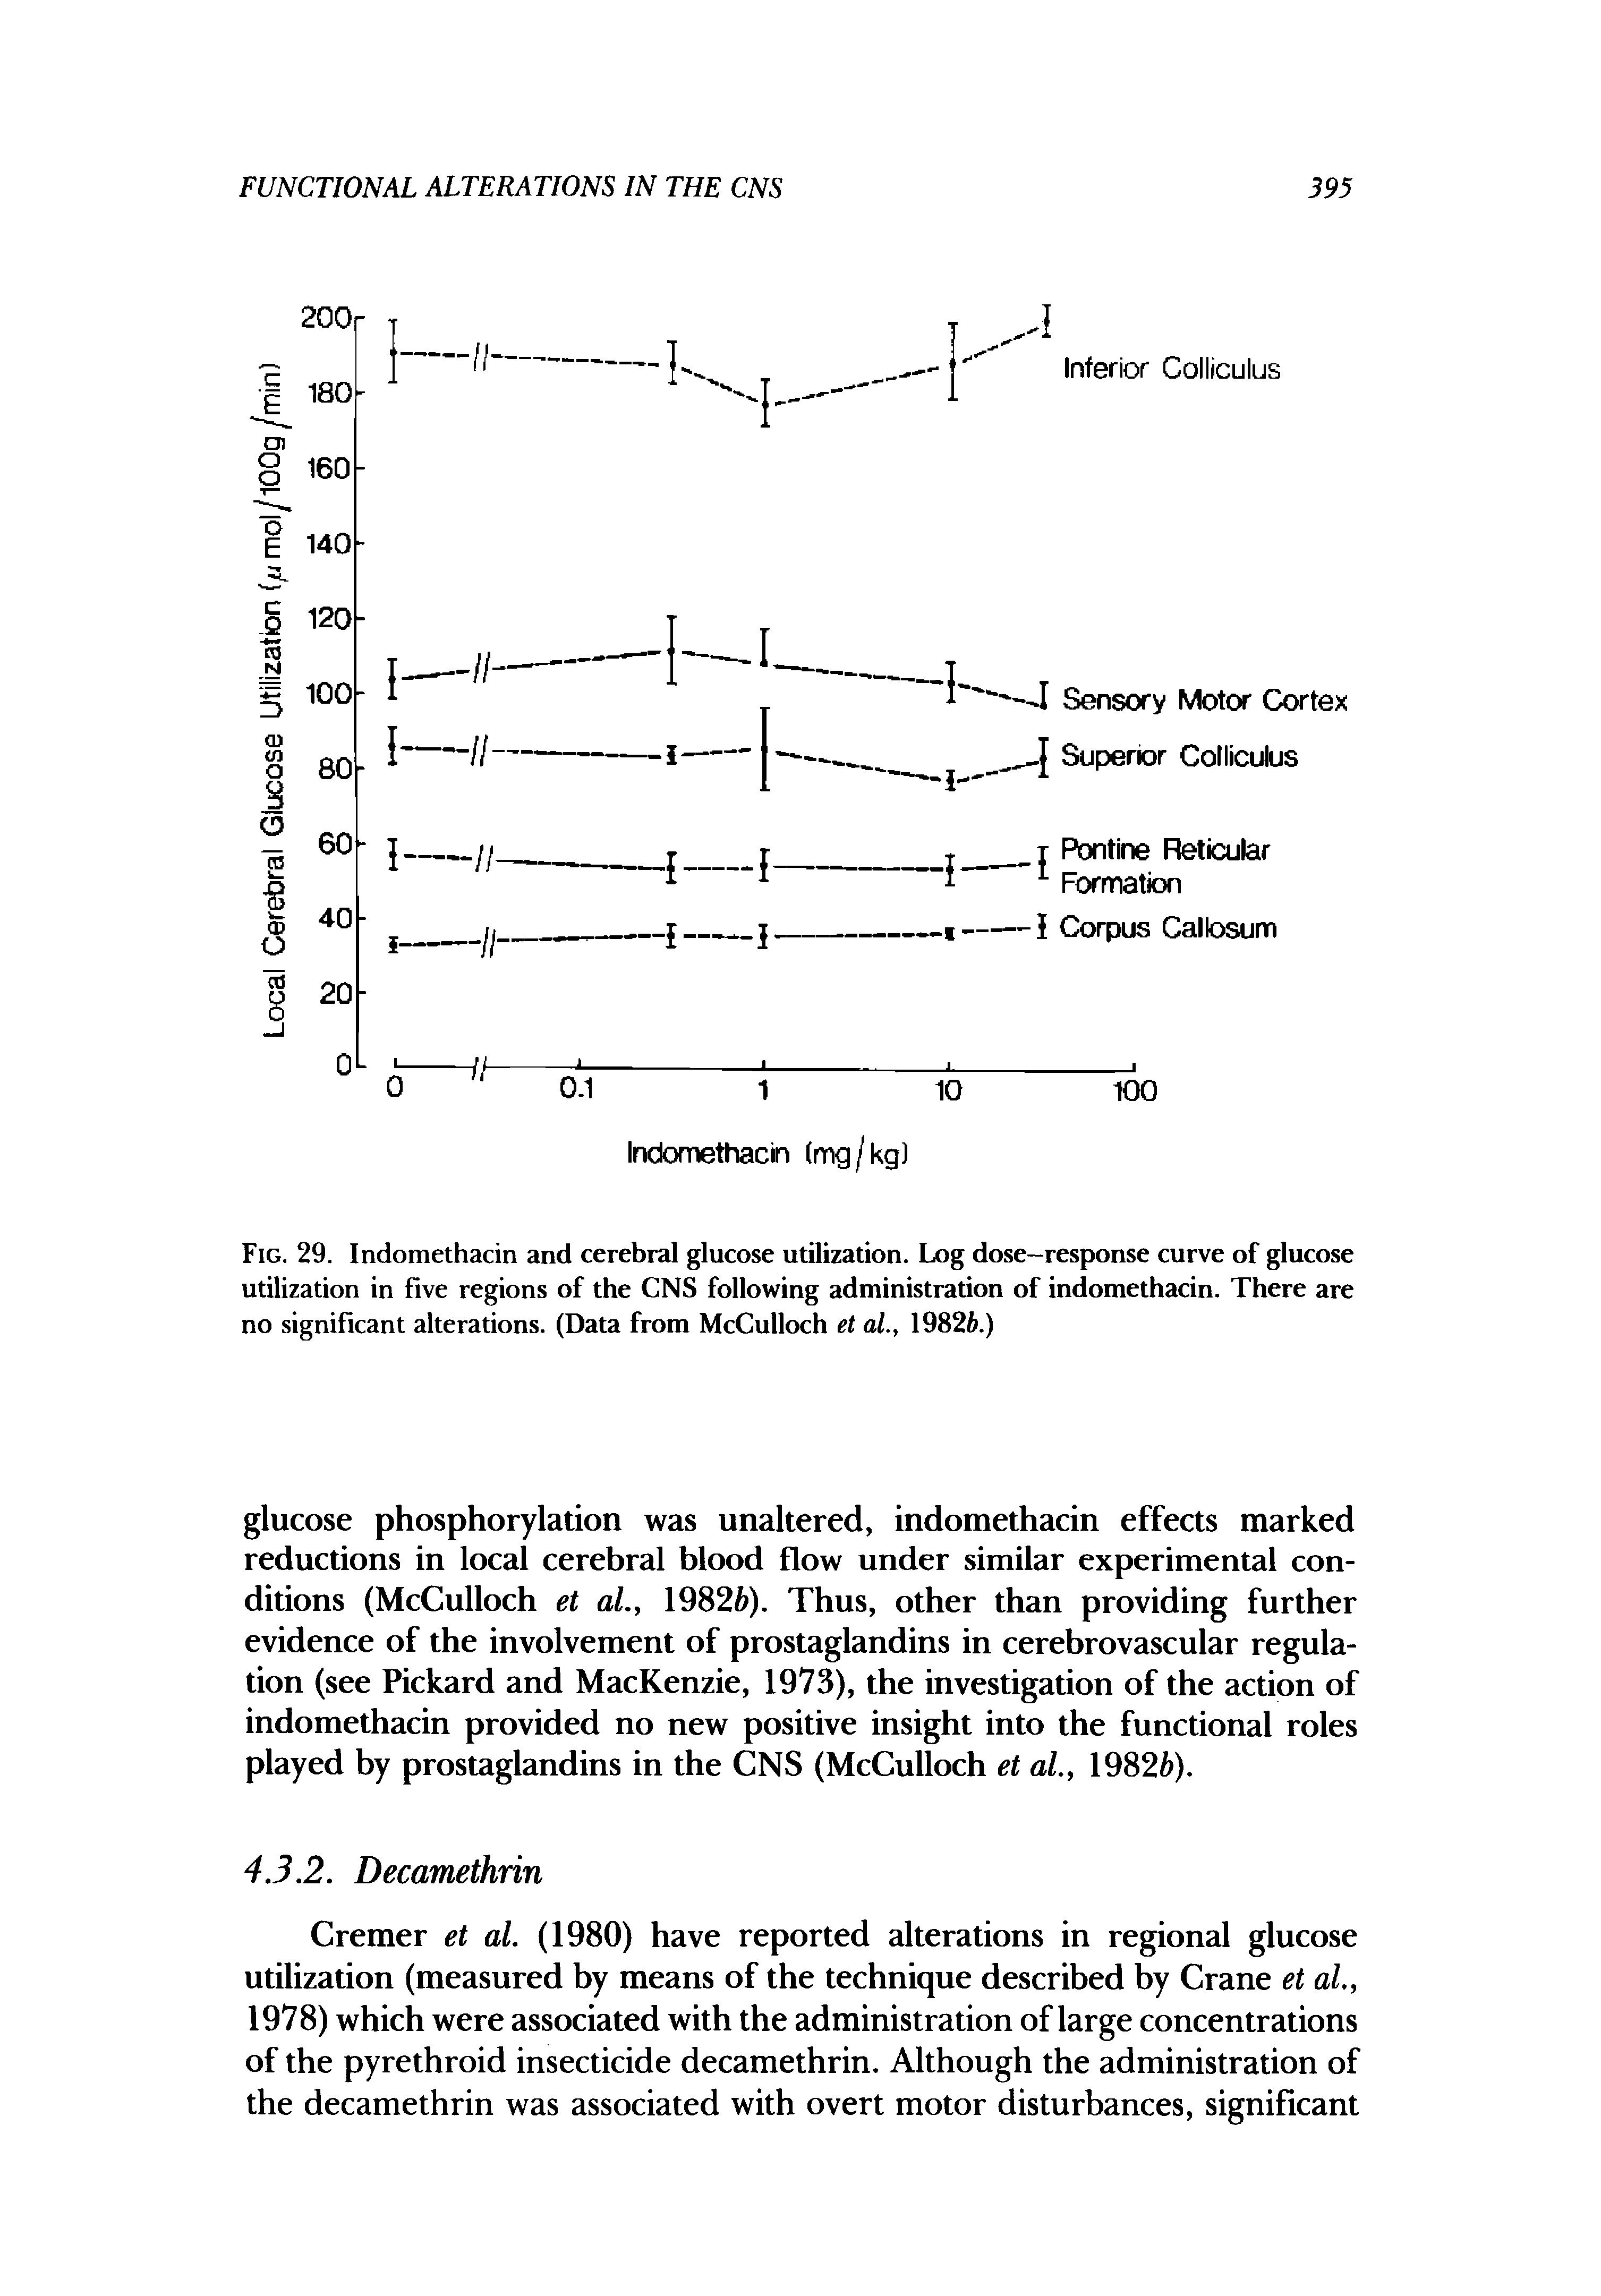 Fig. 29. Indomethadn and cerebral glucose utilization. Log dose-response curve of glucose utilization in five regions of the CNS following administration of indomethadn. There are no significant alterations. (Data from McCulloch et cd., 19826.)...